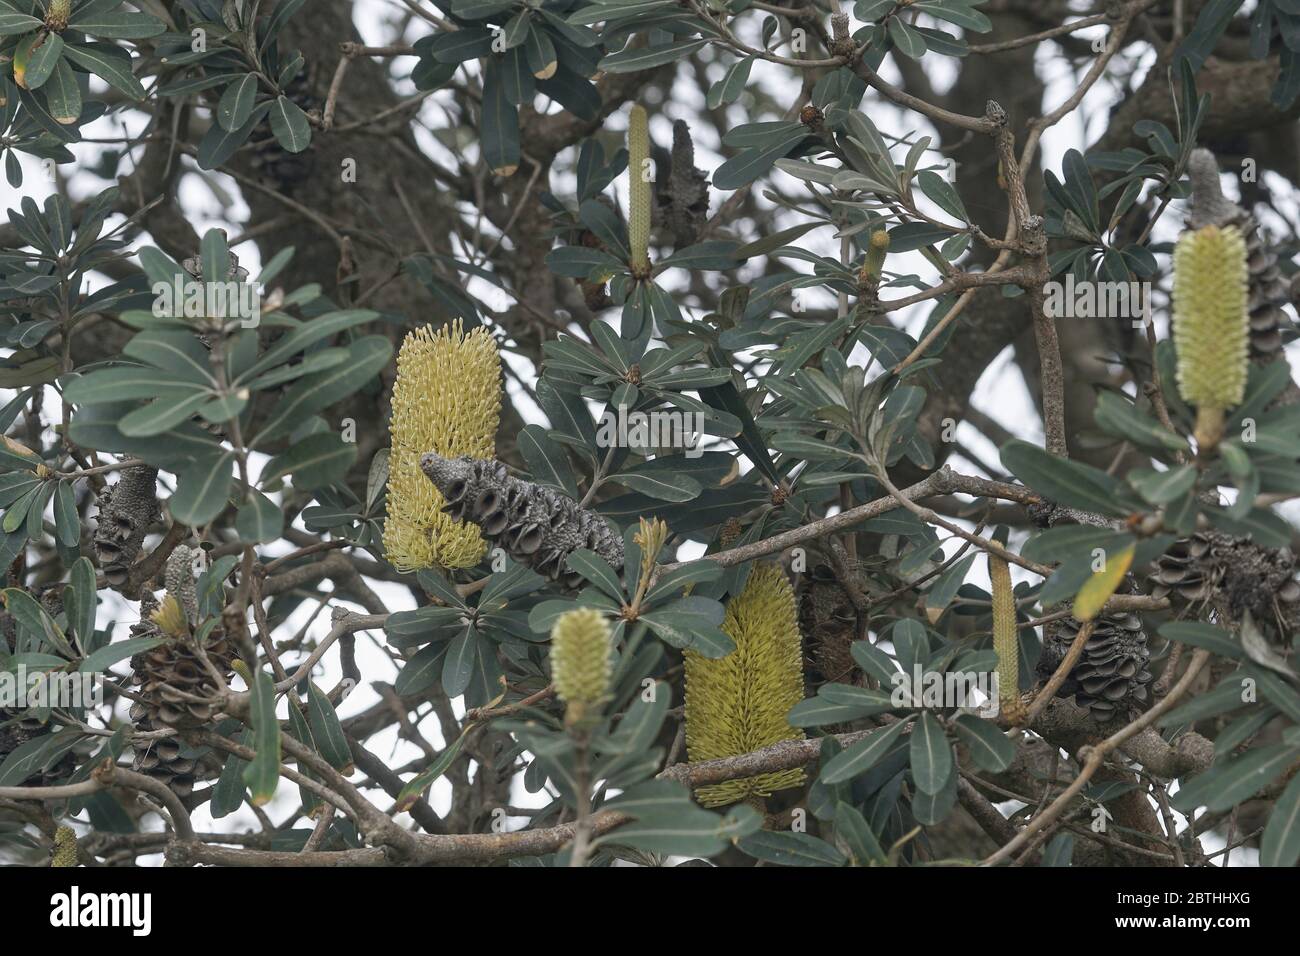 Banksia integrifolia flowers and seed pods on the tree. Stock Photo